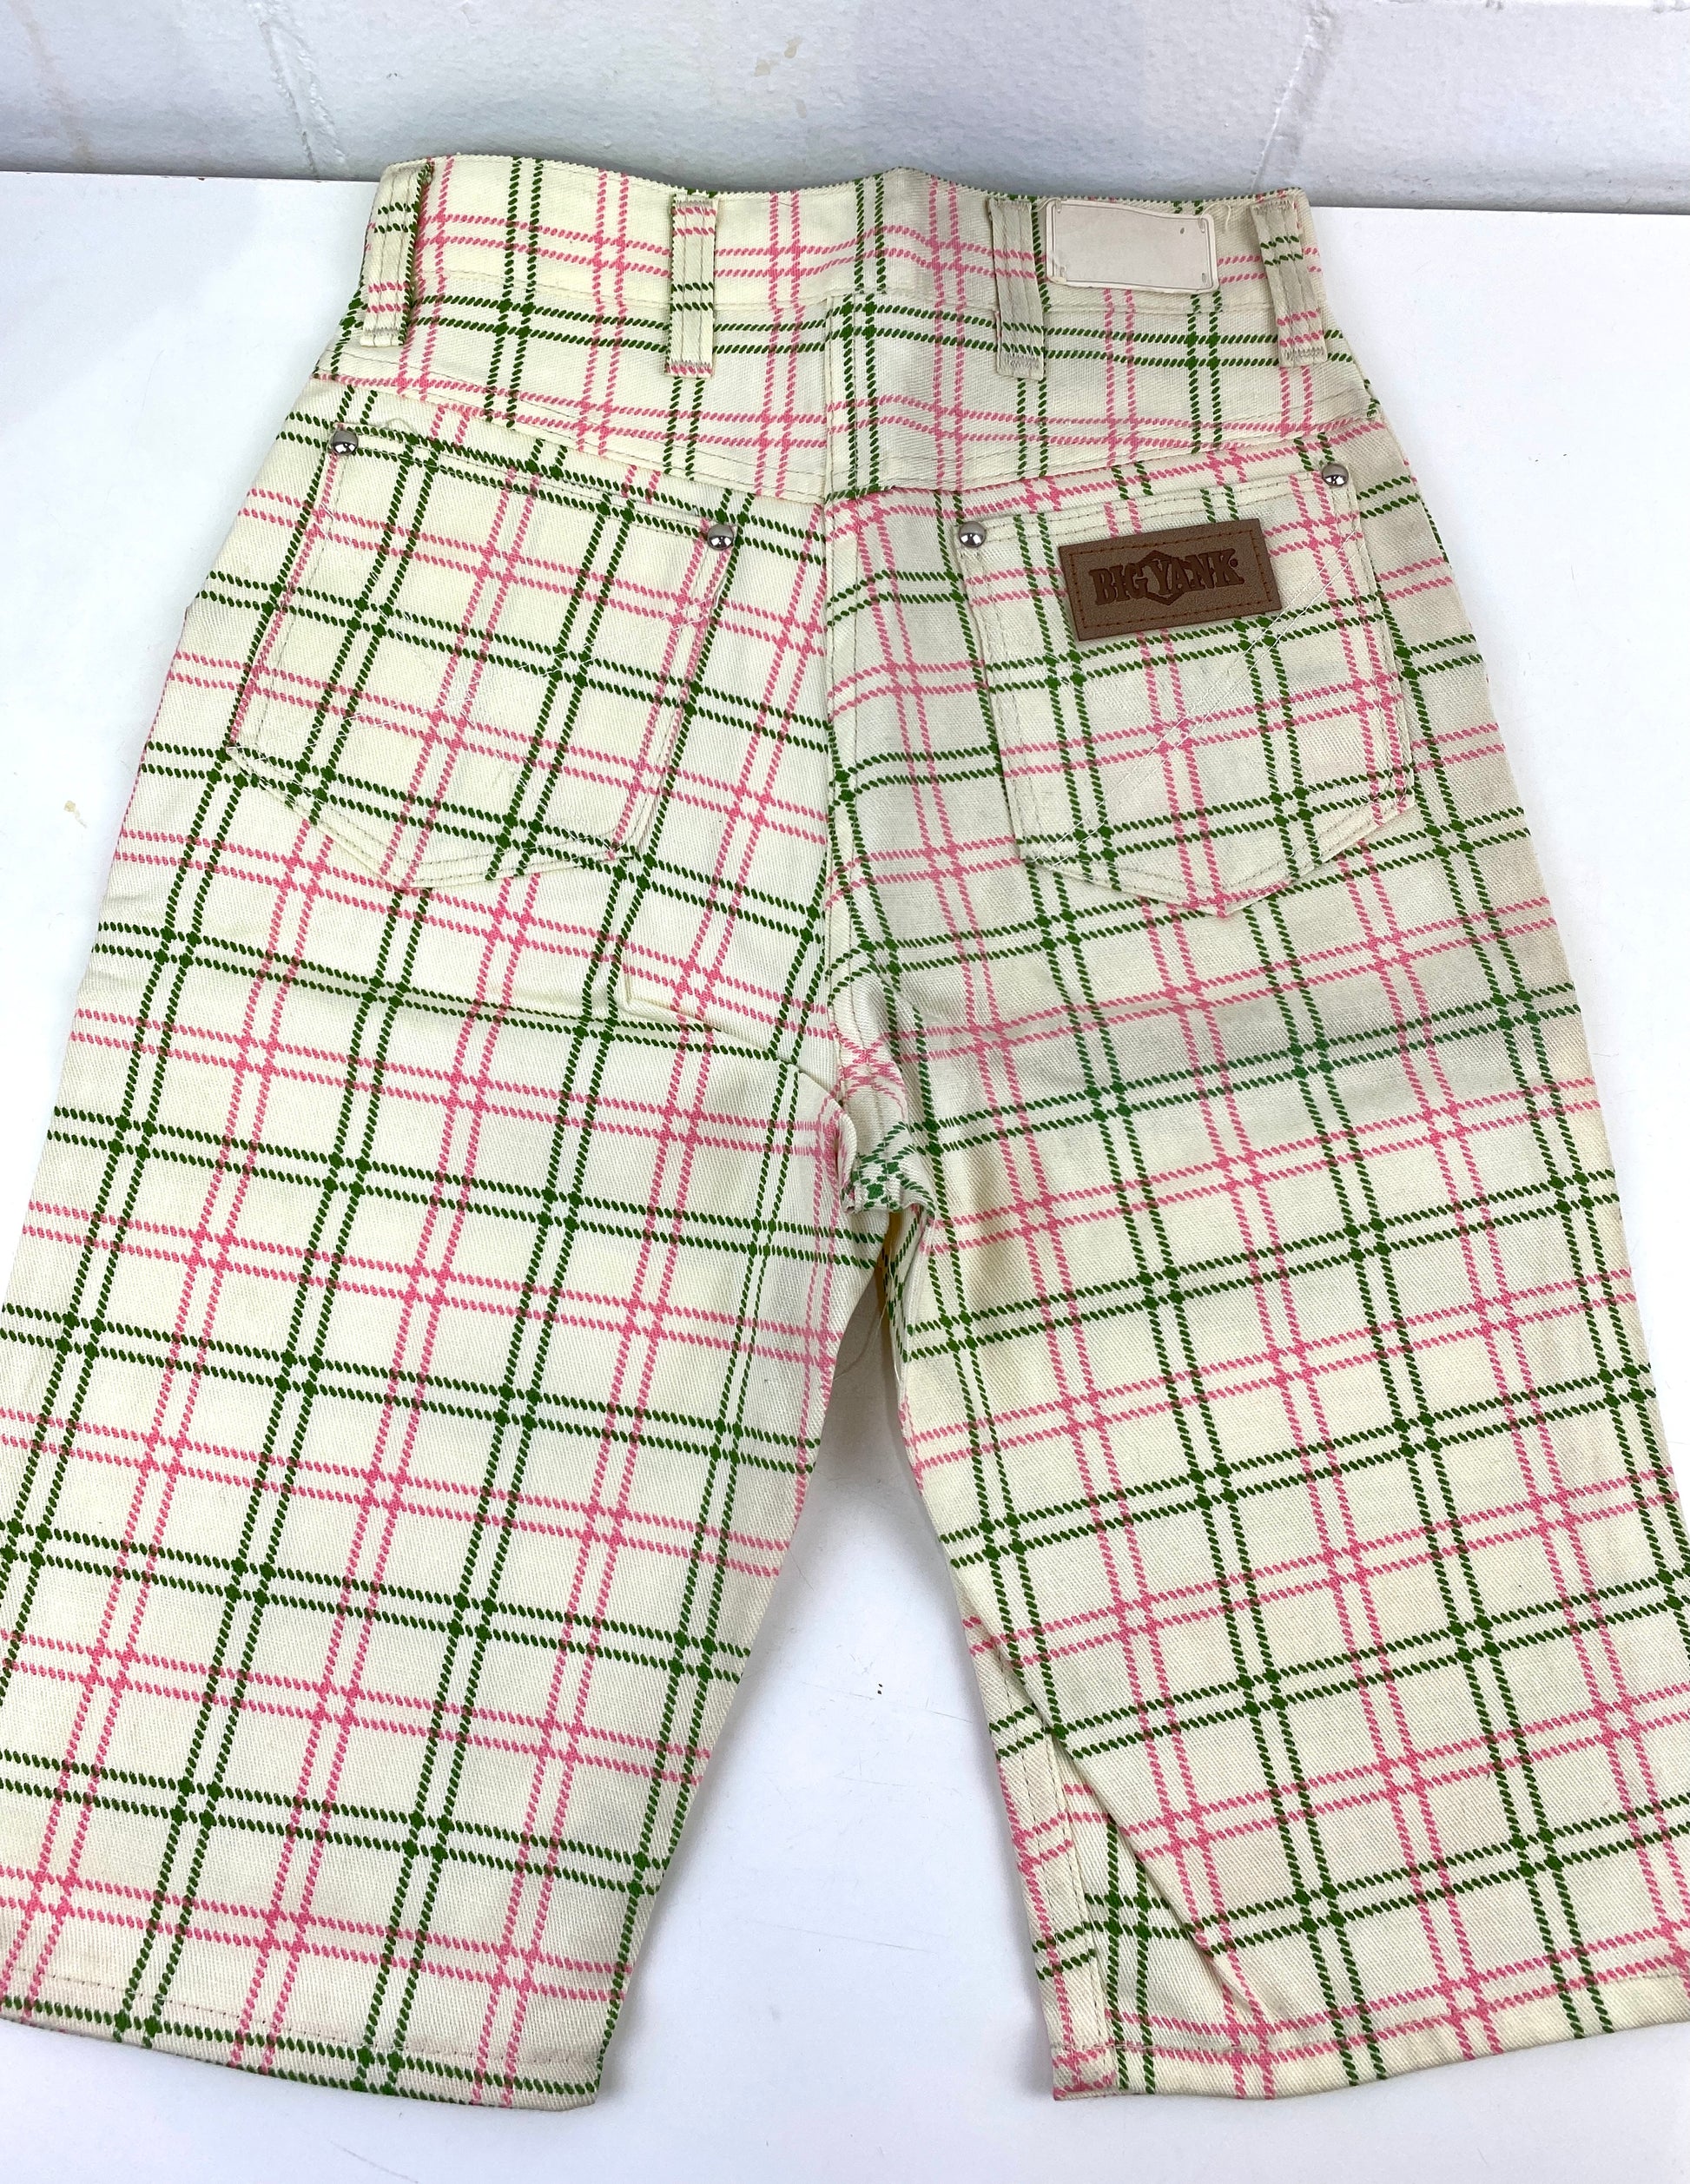 Vintage 1970s Deadstock Girls Jeans, Kids 'Big Yank' Cut-Off Jean Shorts, Pink Tattersall Plaid, NOS